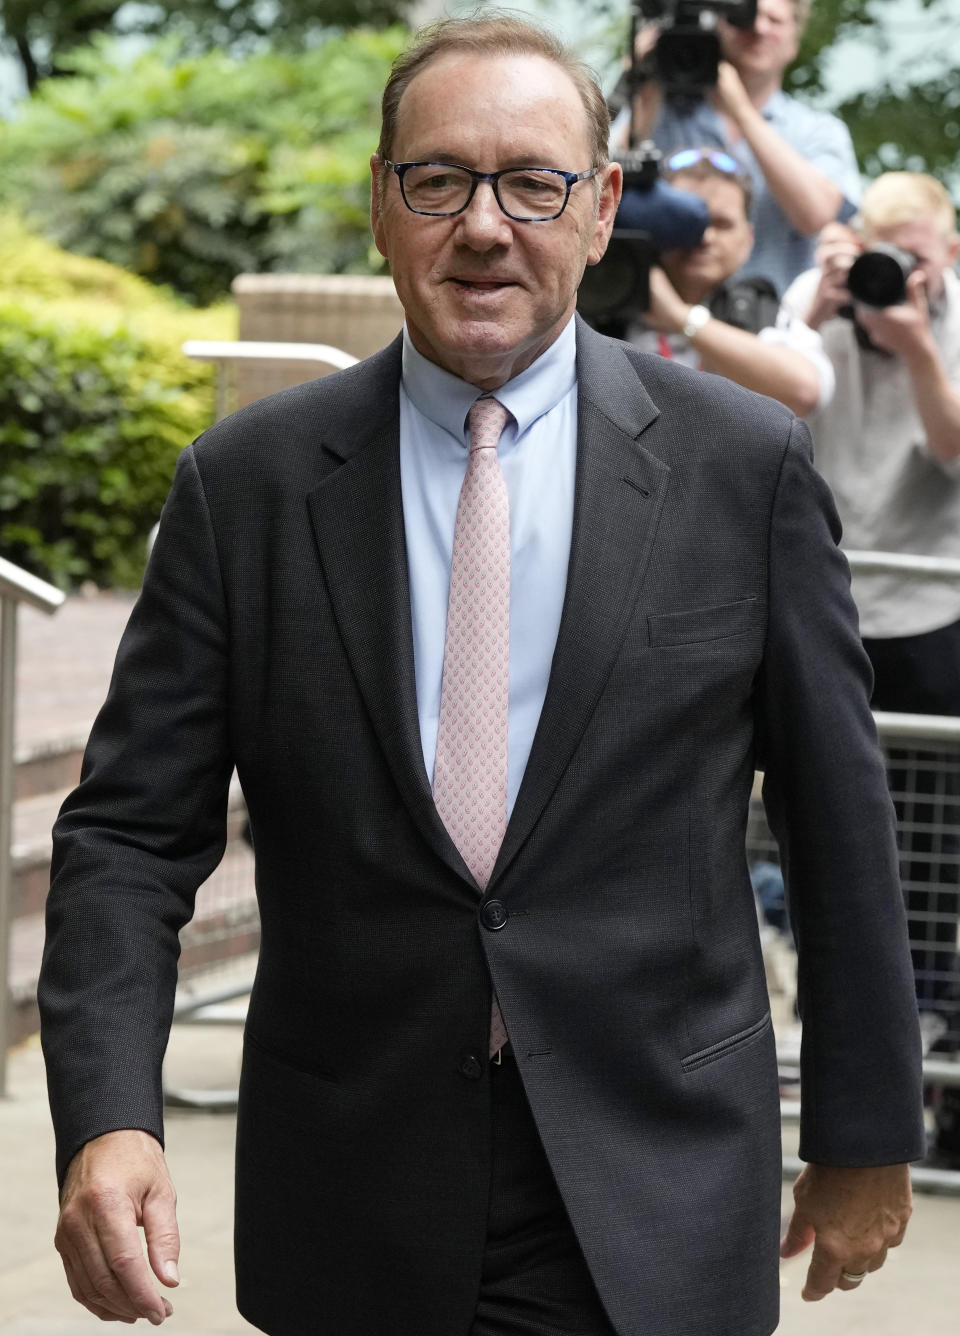 Actor Kevin Spacey leaves Southwark Crown Court in London, Wednesday, June 28, 2023. Spacey is going on trial on charges he sexually assaulted four men as long as two decades ago. The double-Oscar winner faces a dozen charges as his trial begins Wednesday at Southwark Crown Court. Spacey pleads not guilty to all charges. (AP Photo/Frank Augstein)